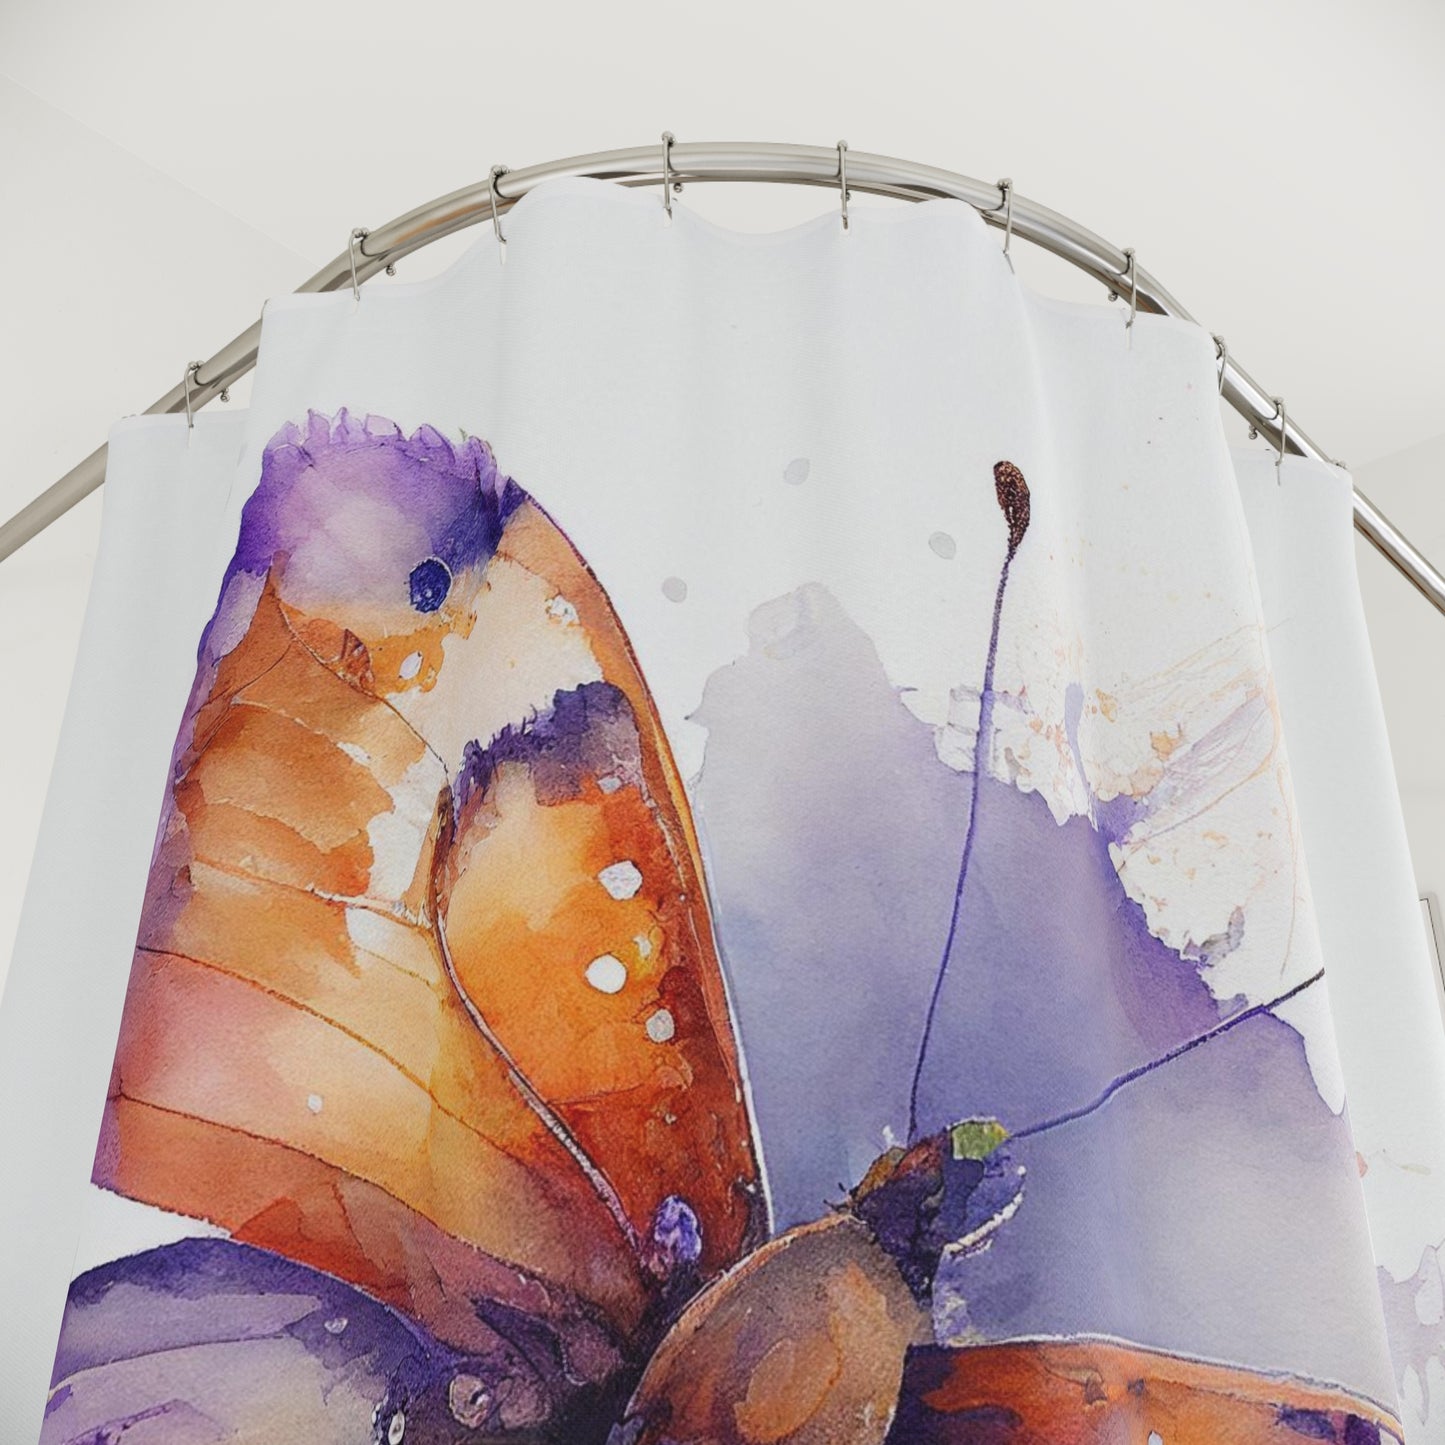 Polyester Shower Curtain MerlinRose Watercolor Butterfly 2